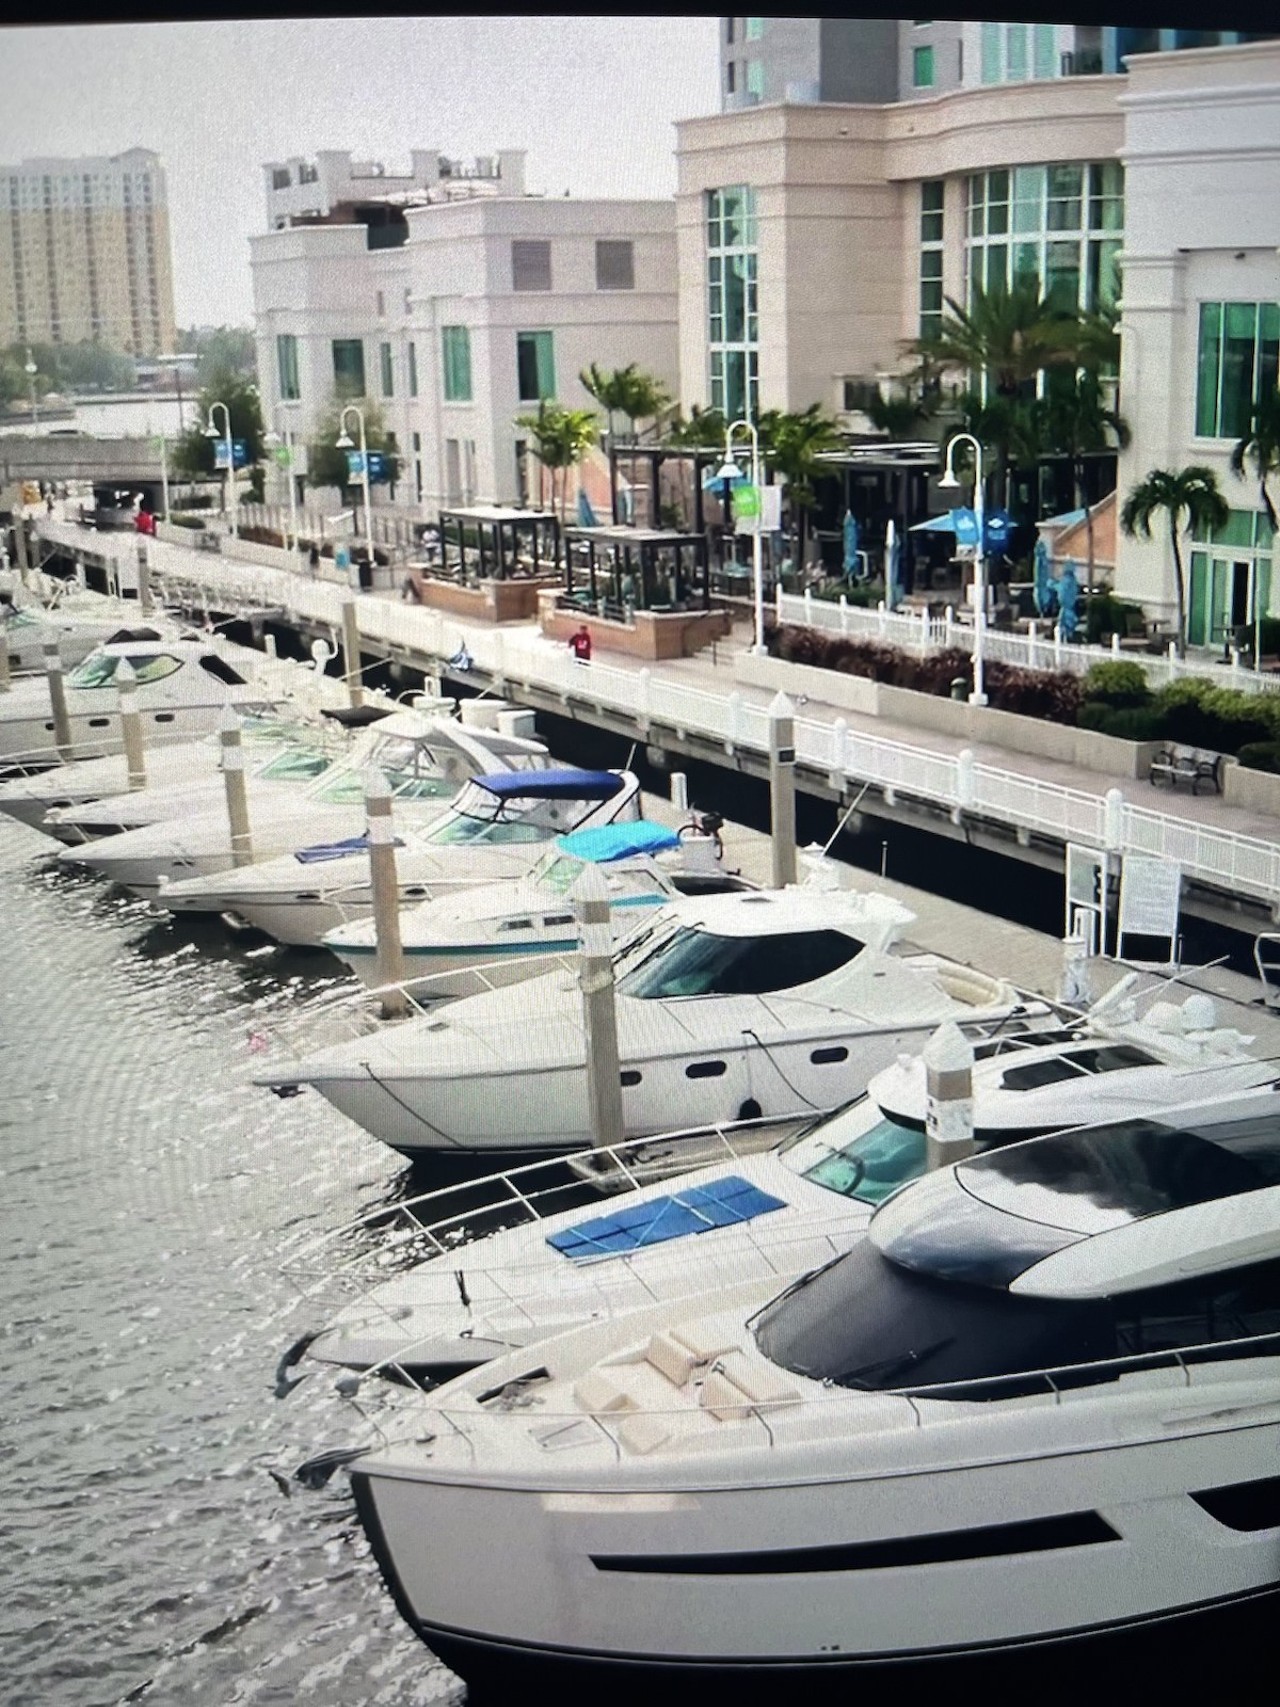 Anchor & Brine
505 Water St., Tampa 
Much of the drone footage featuring yachts docked in downtown Tampa is taken from above this waterfront favorite at Tampa Marriott Water Street.